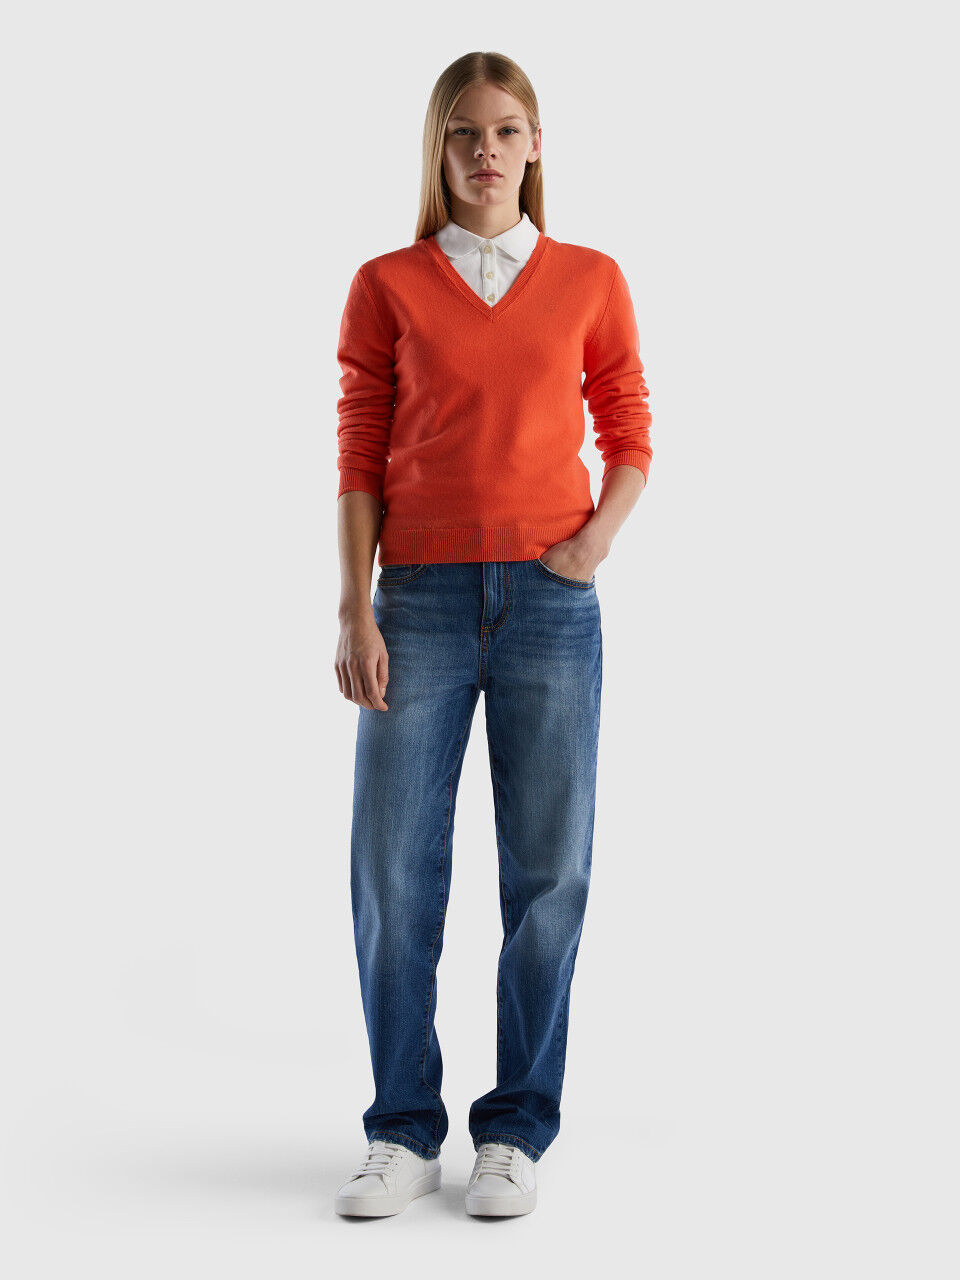 Coral V-neck sweater in pure Merino wool